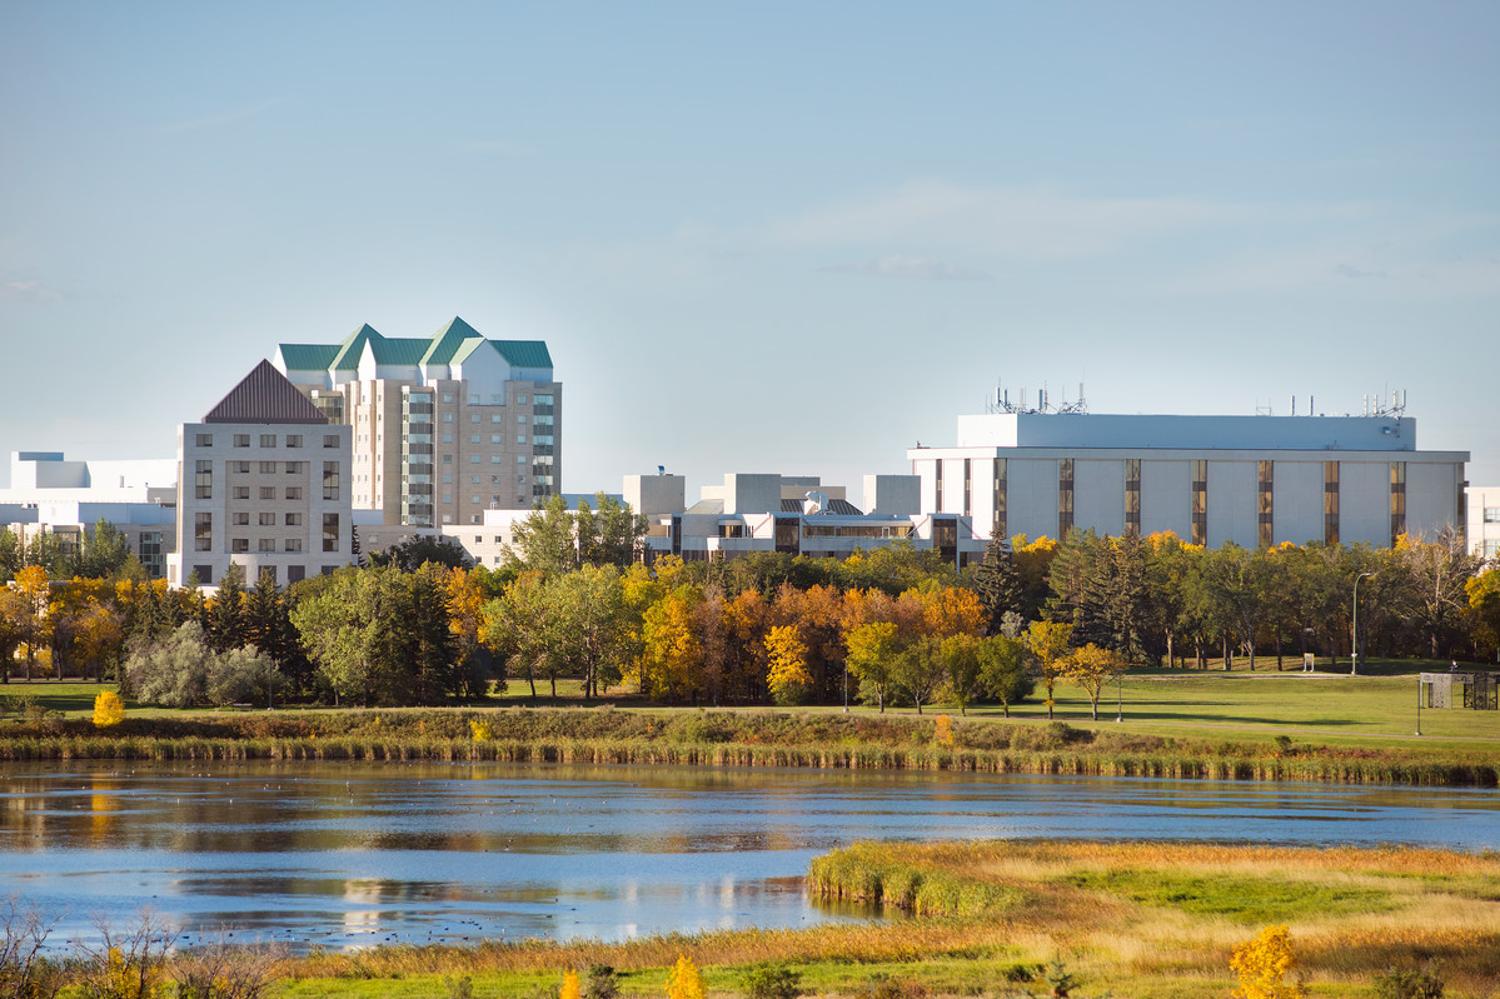 View of U of R campus from across Wascana Lake